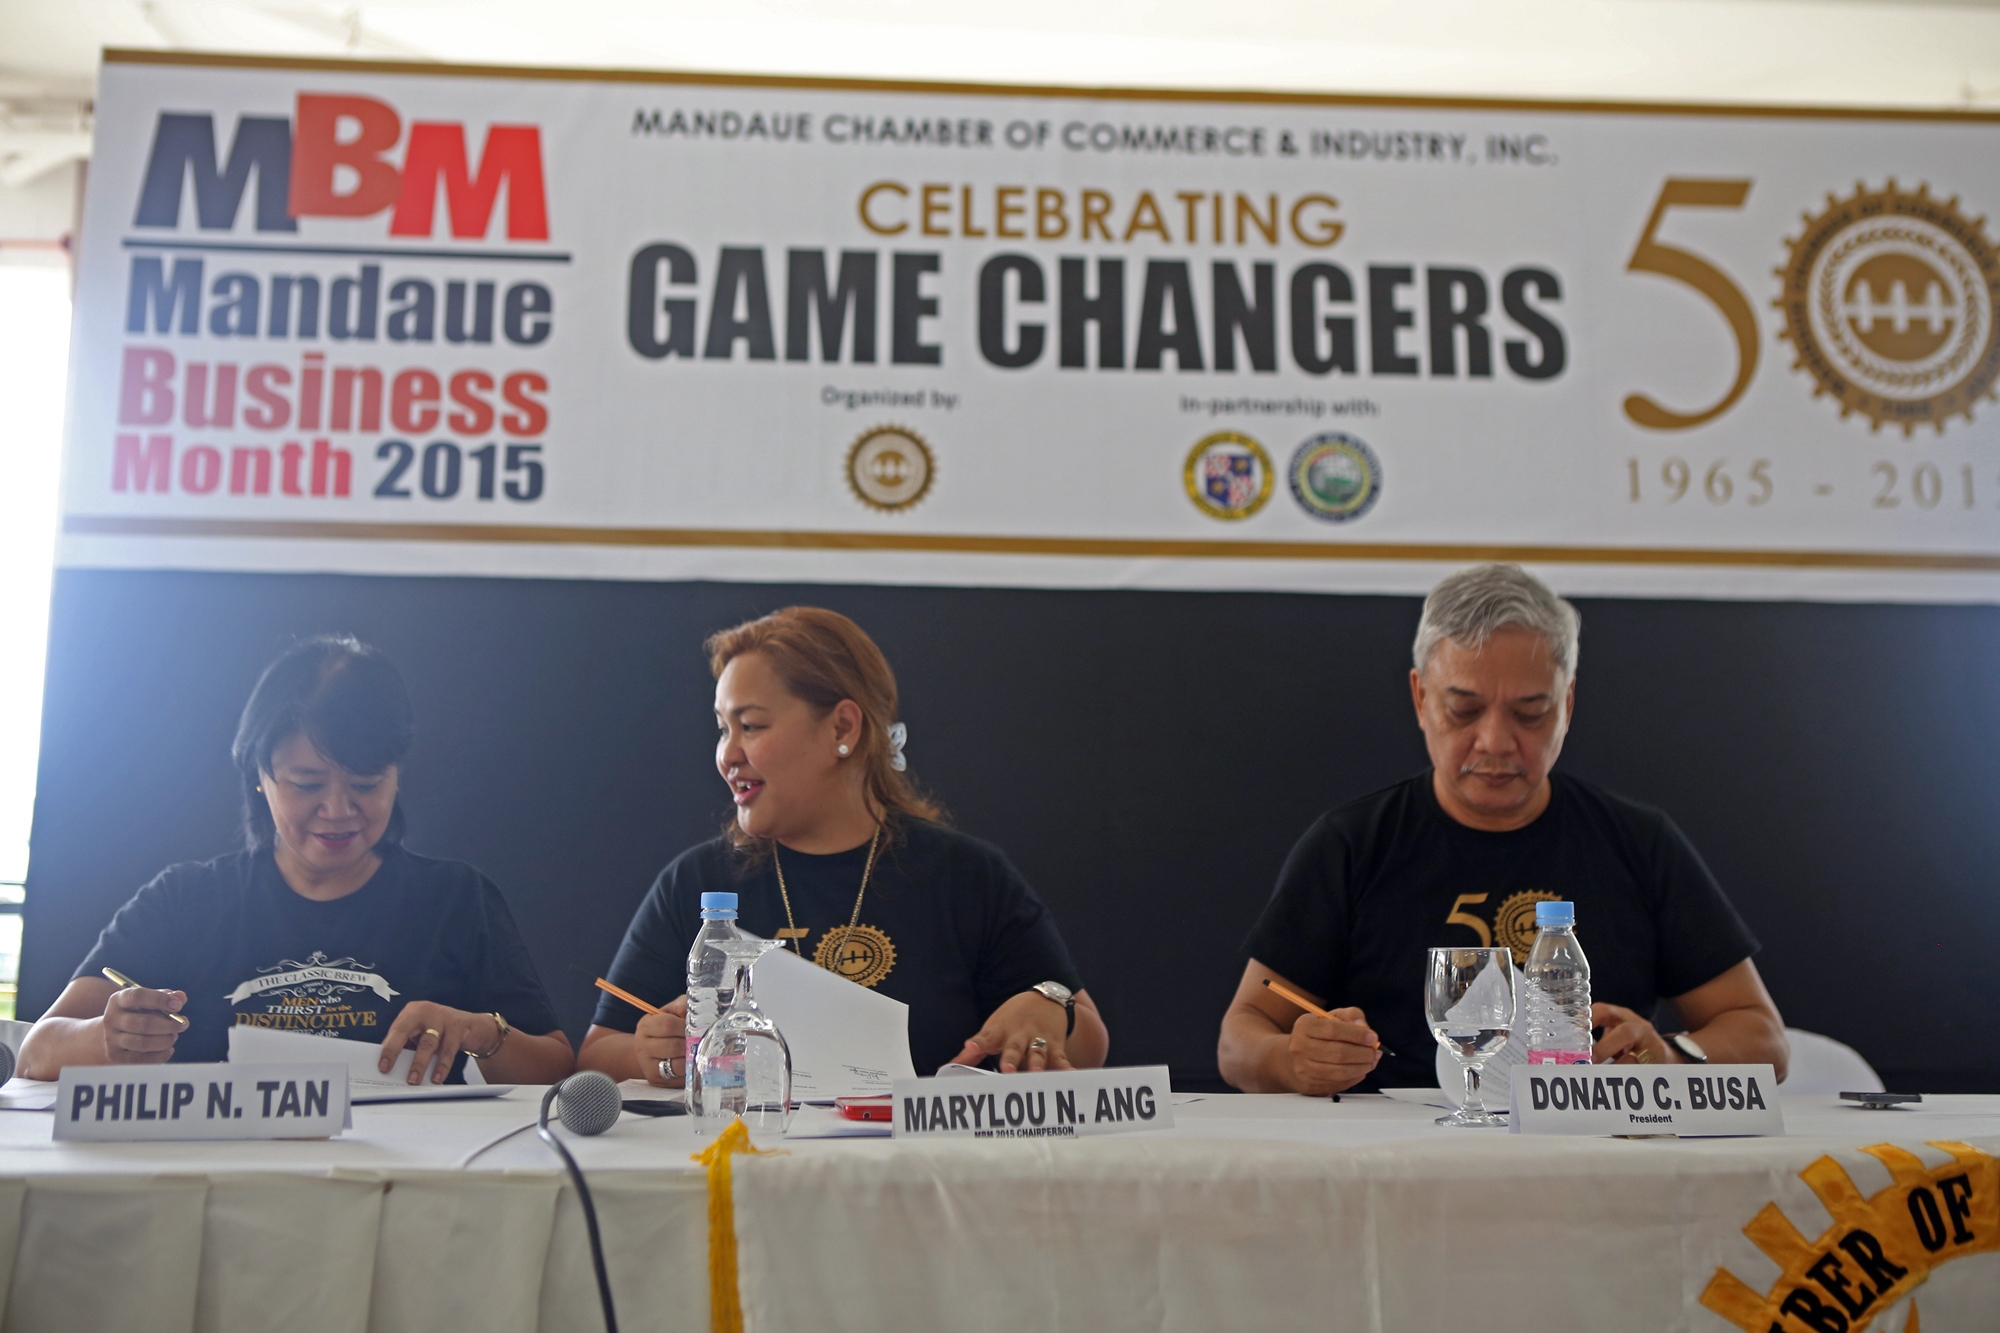 Marylou Ang (center), overall chairman of the Mandaue Business Month; Girlie Garces, San Miguel corporate communication officer, and Donato Busa, Mandaue Chamber of Commerce and Industry president, sign an agreement during last Saturday’s launching of the Mandaue Business Month. (CDN PHOTO/LITO TECSON)